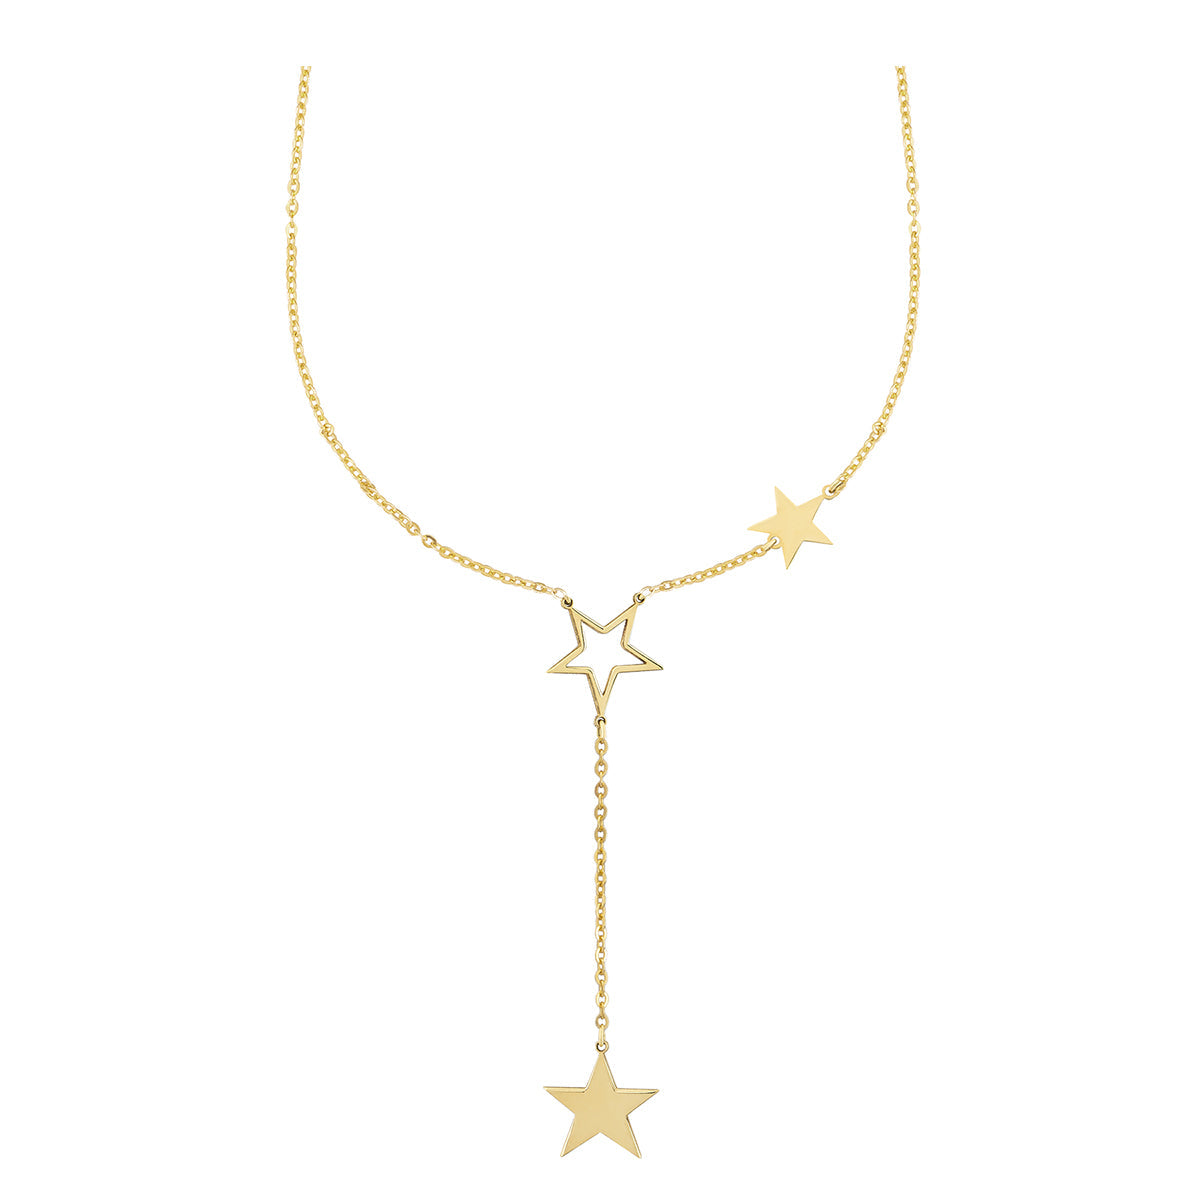 Star Drop Necklace in 18K Yellow Gold